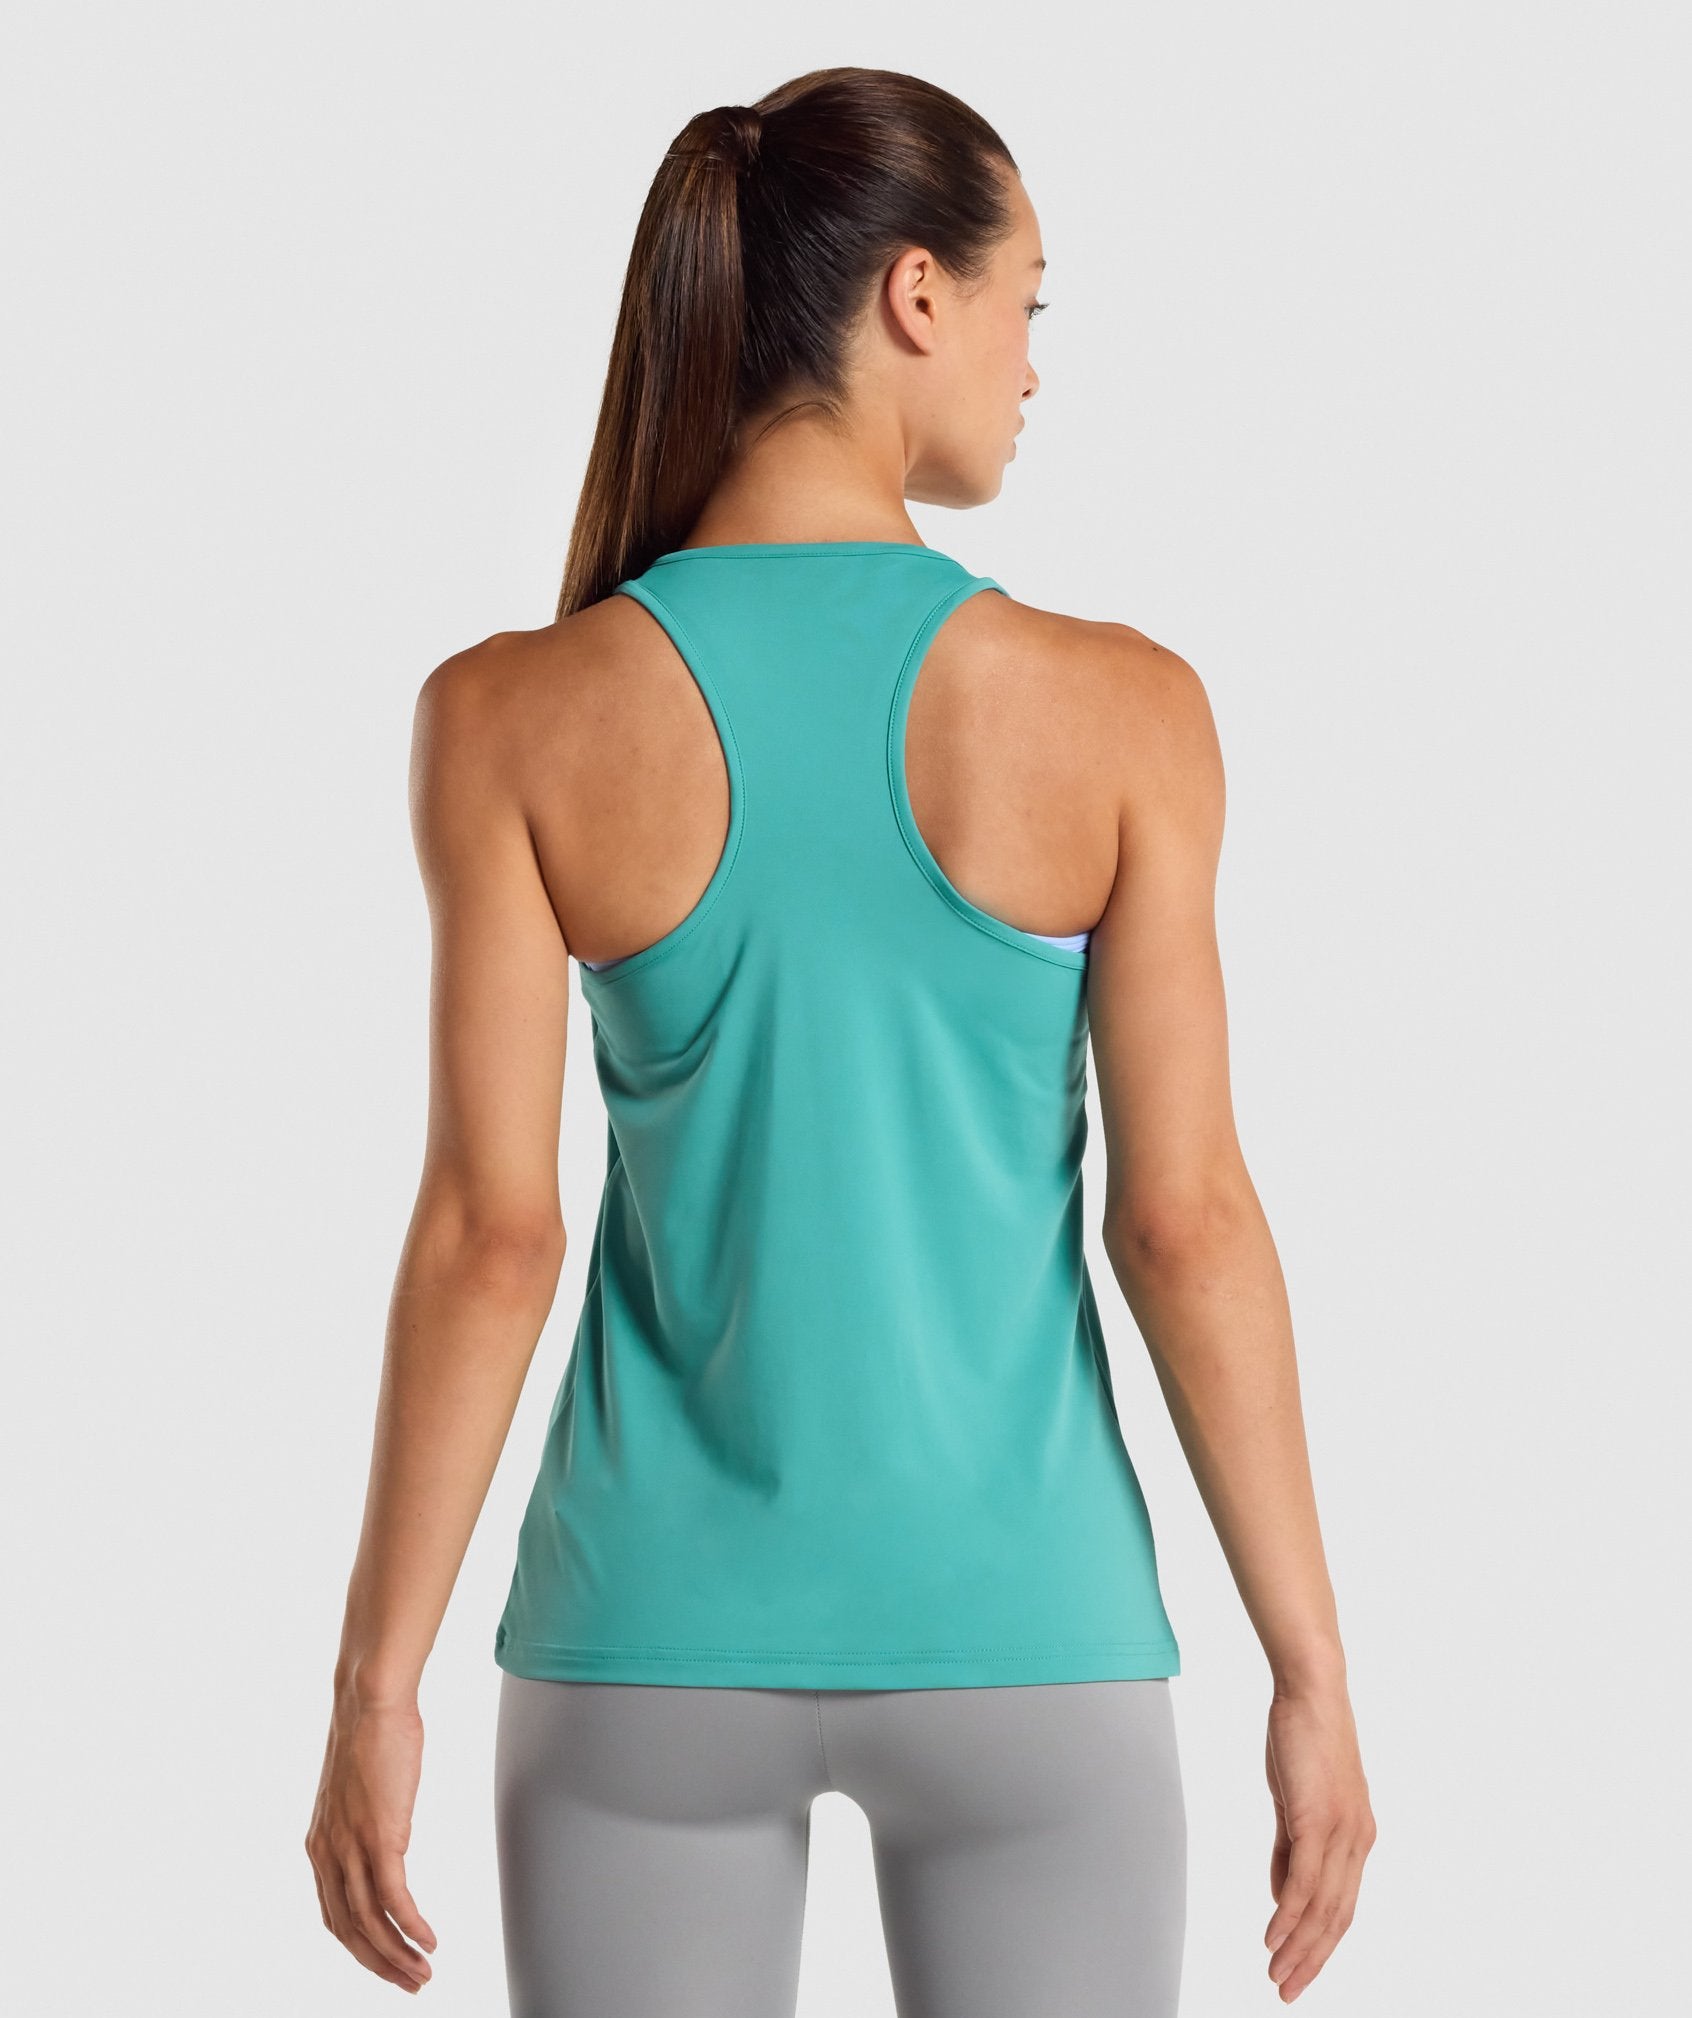 Training Vest in Teal - view 2